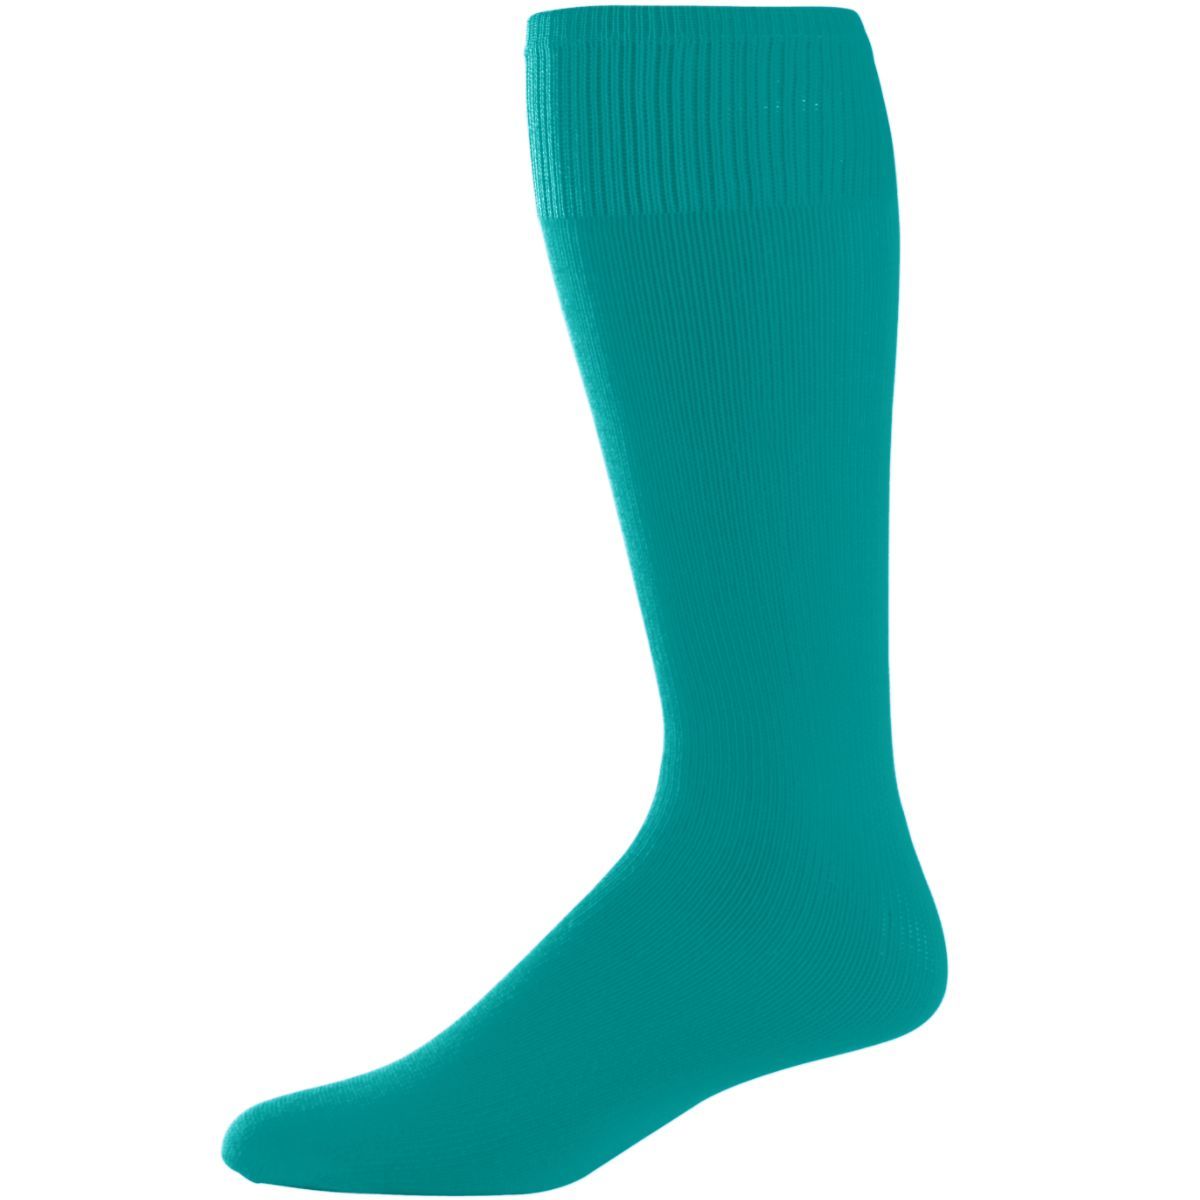 Augusta Sportswear Game Socks in Teal  -Part of the Accessories, Augusta-Products, Accessories-Socks product lines at KanaleyCreations.com